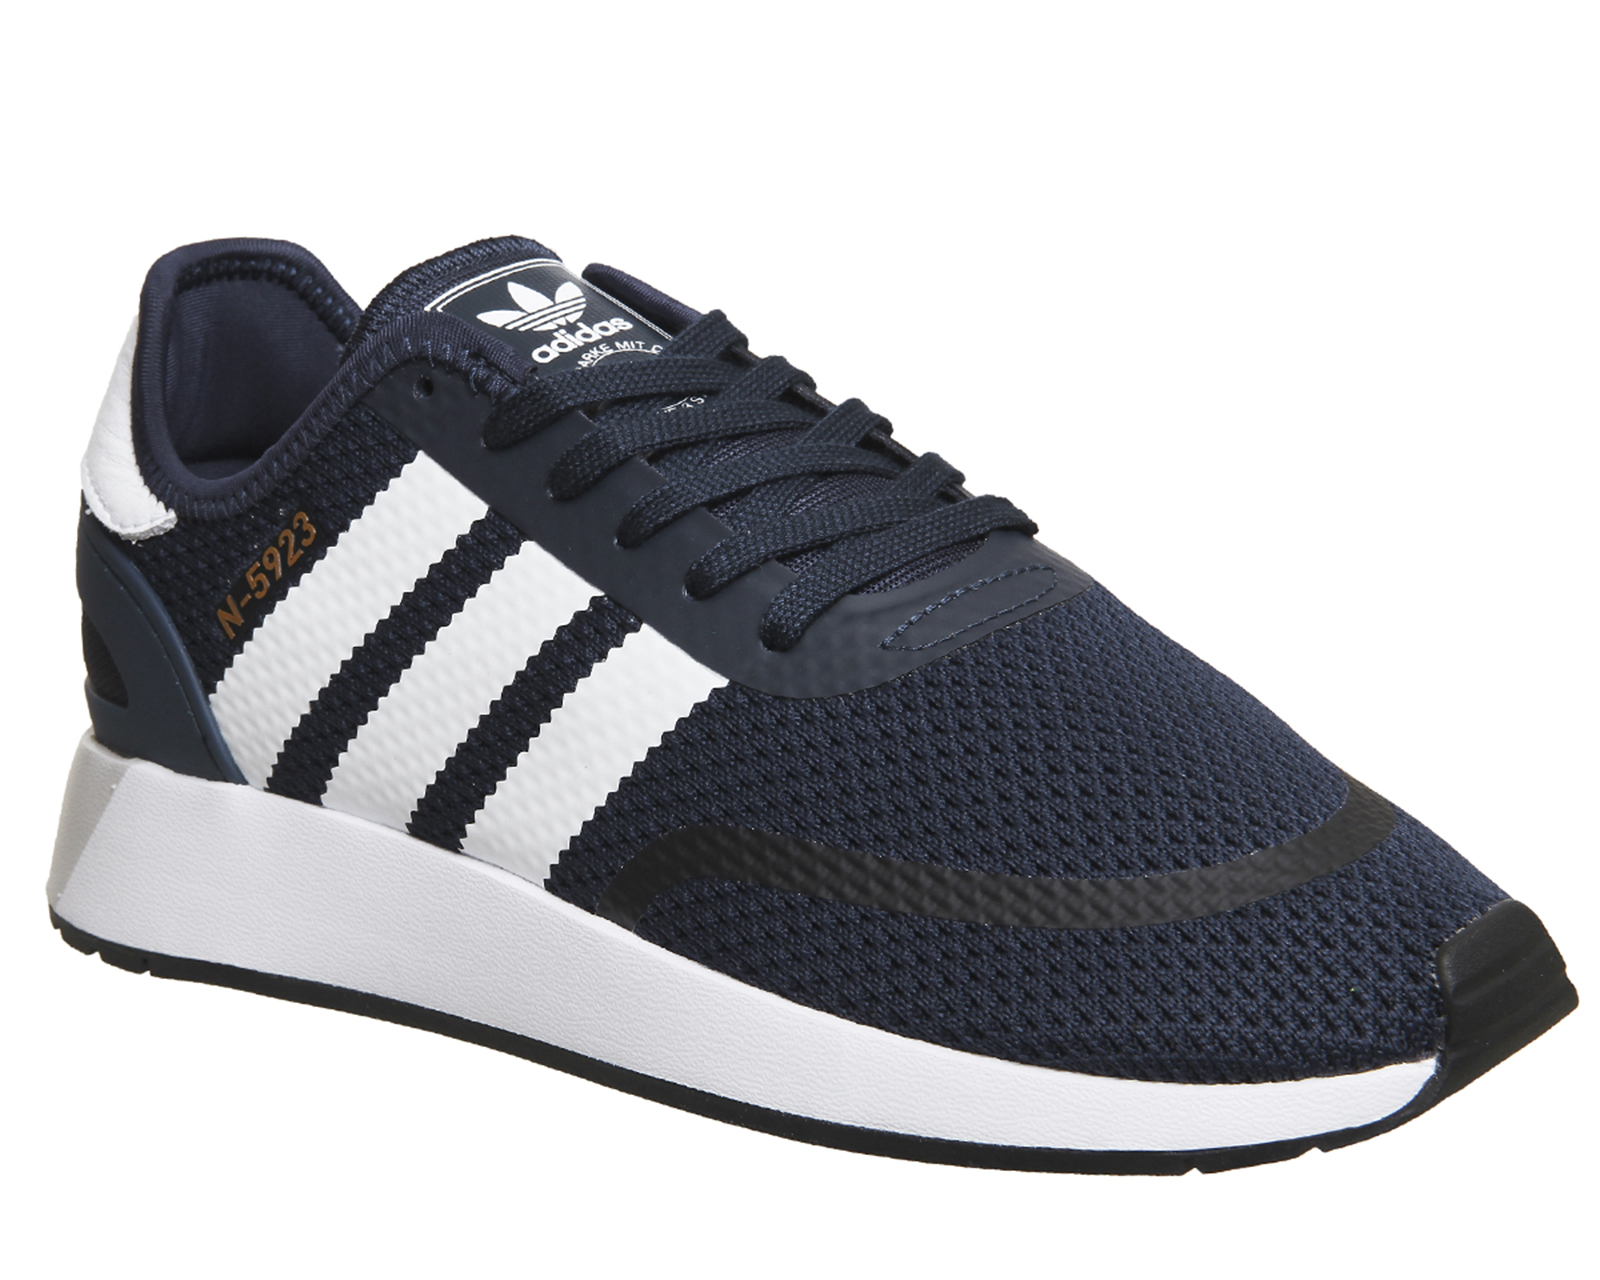 adidas N-5923 Trainers Collegiate Navy - Hers trainers